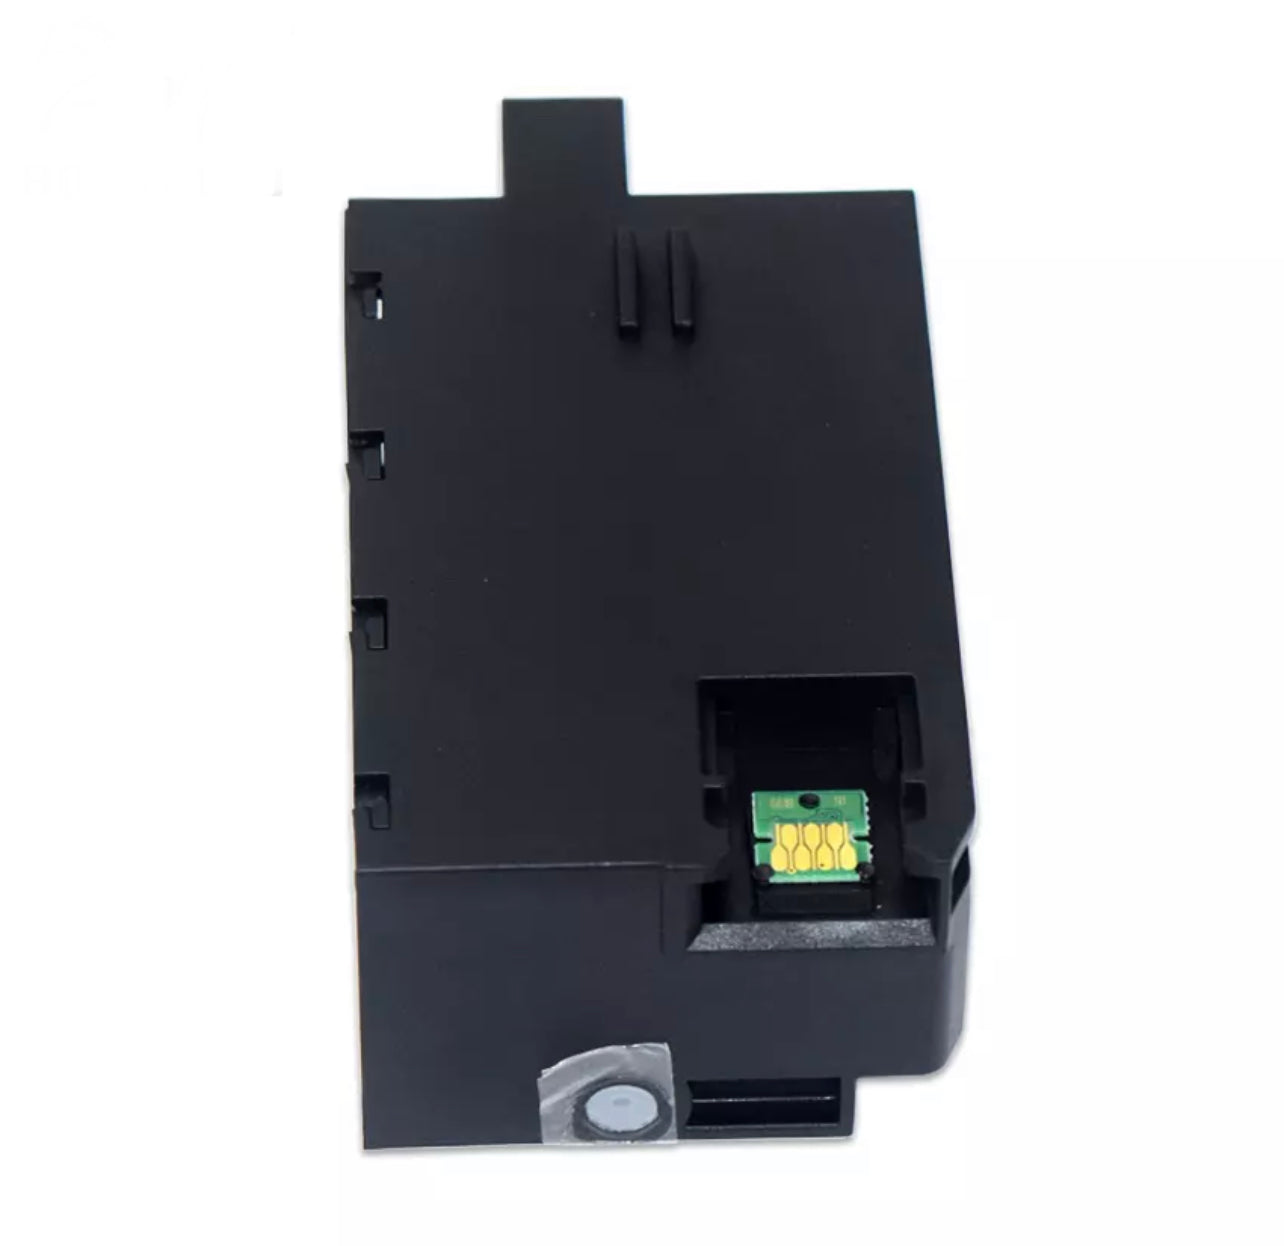 T3661 T3661C E3661 Waste Ink Tank Maintenance Box For Epson